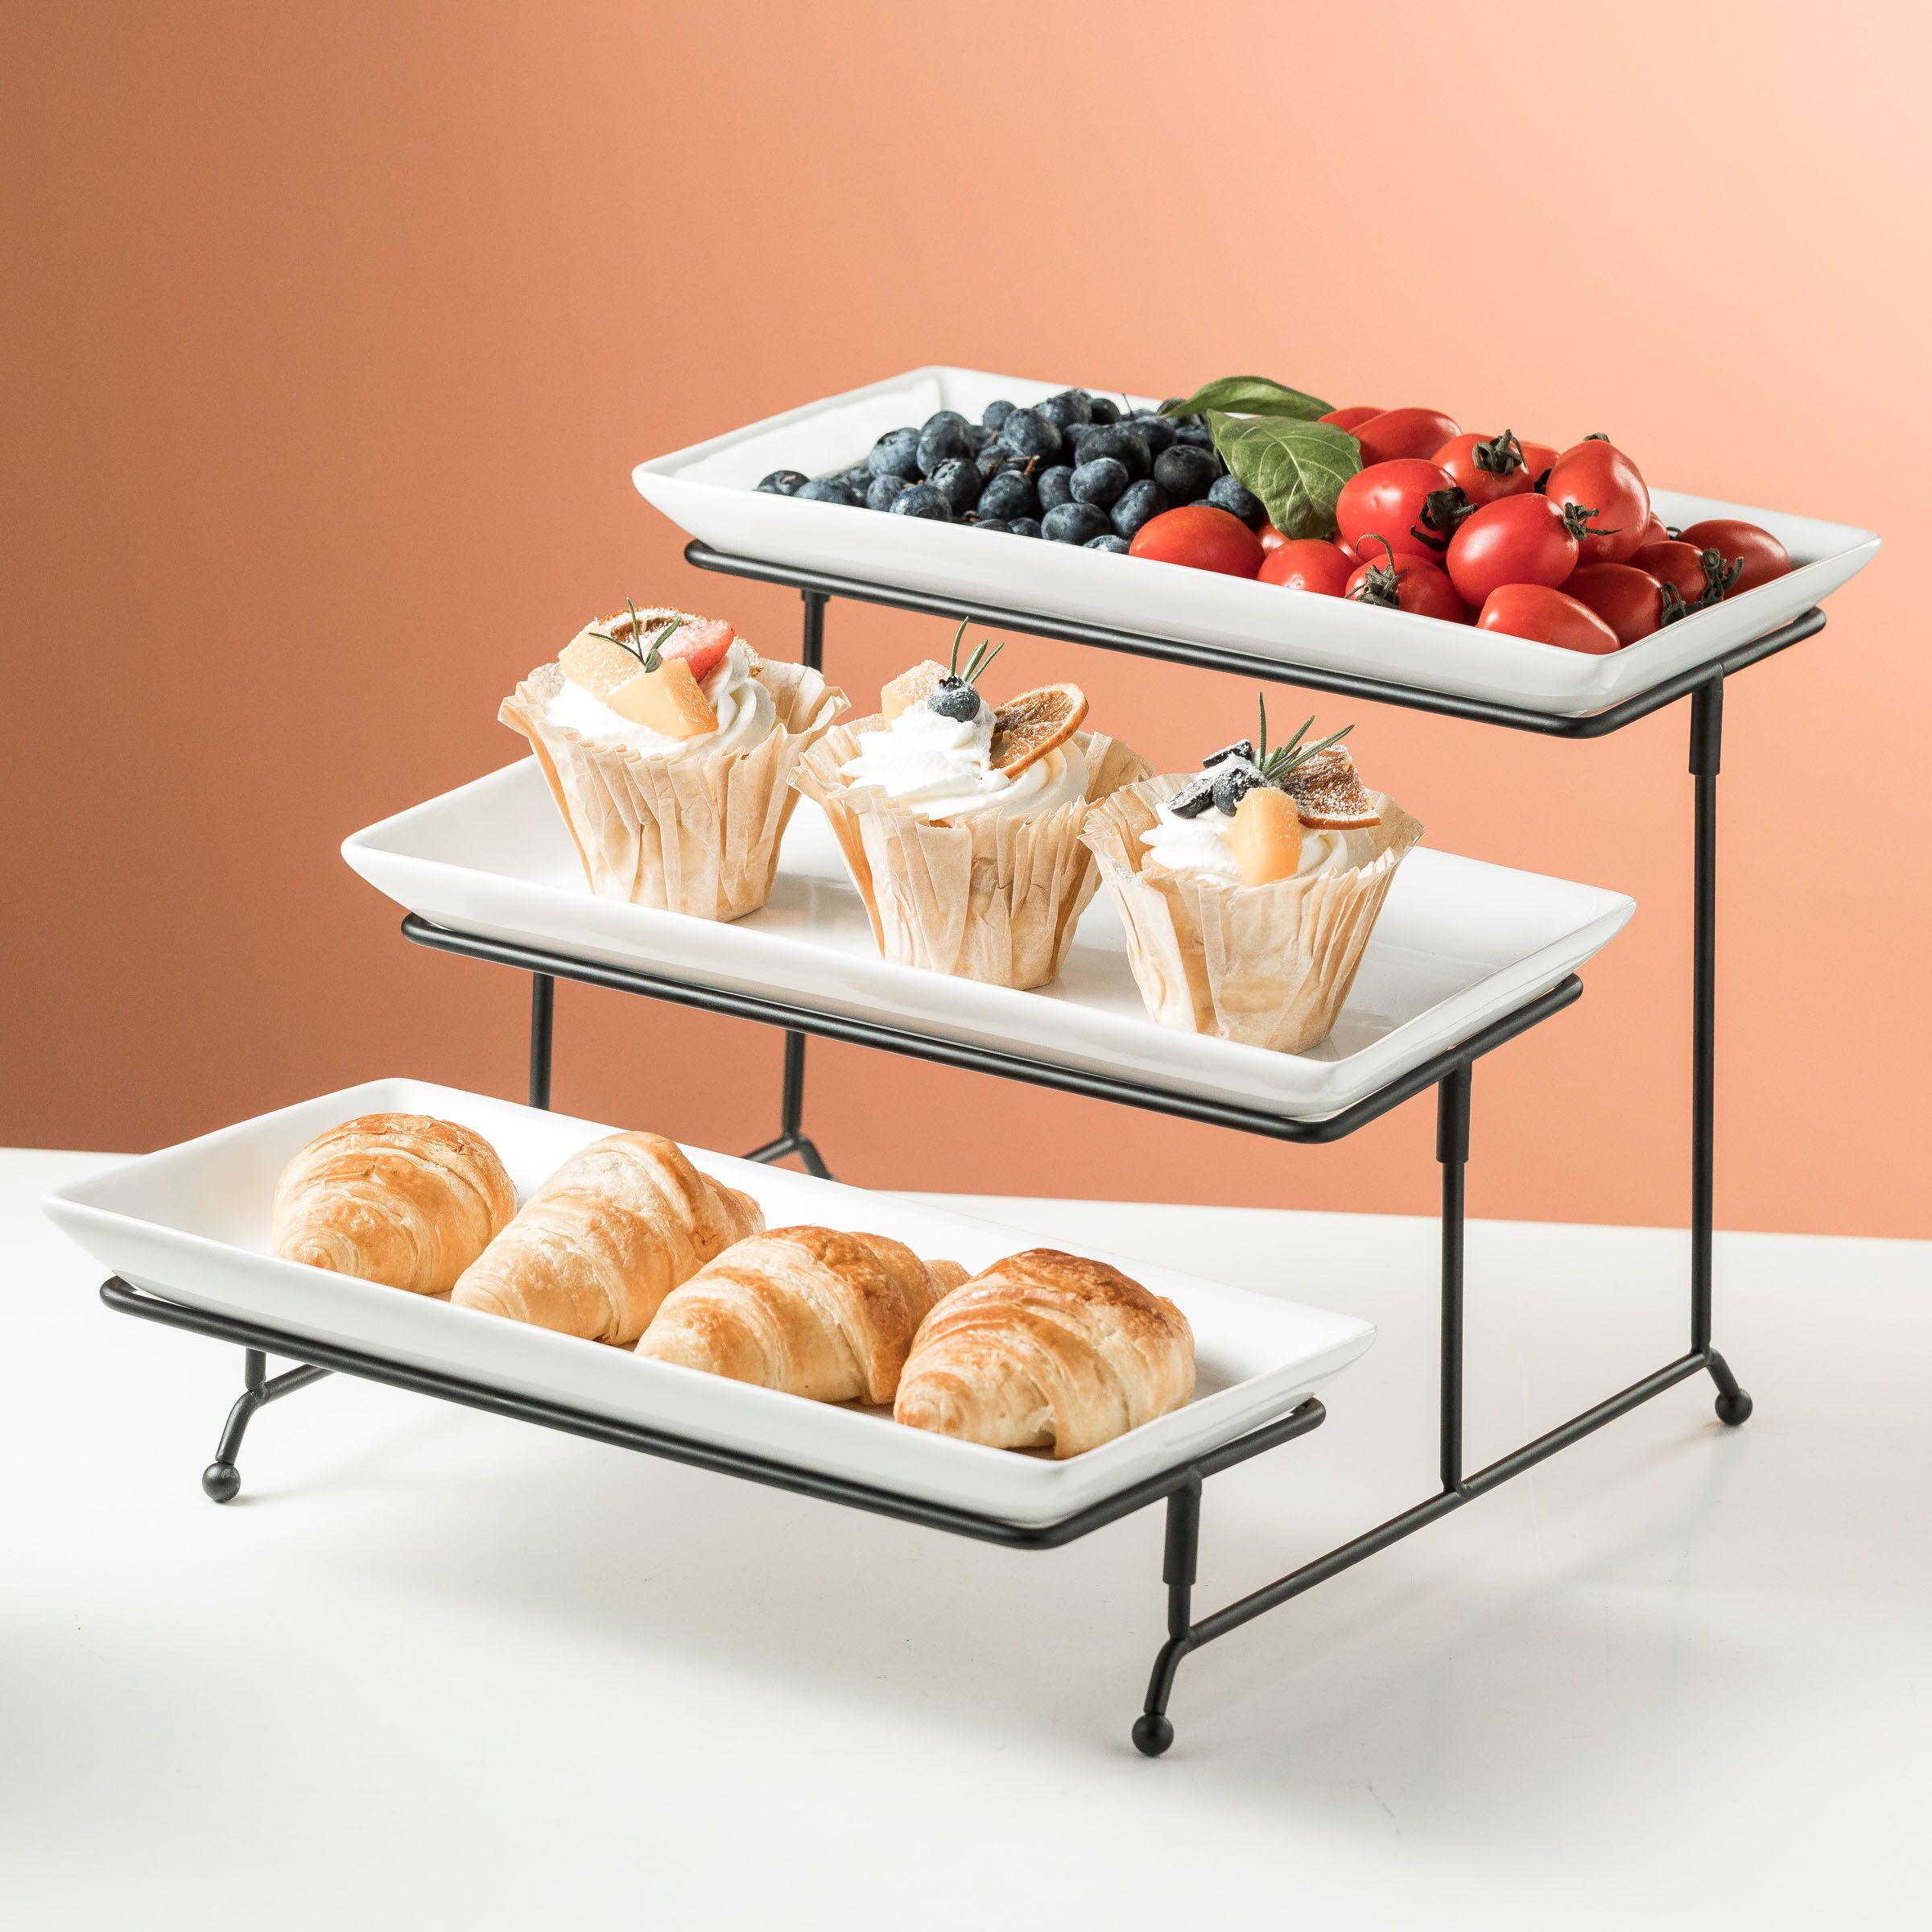 LAUCHUH 3 Tier Serving Plate Set Serving Trays Collapsible Metal Rack with 3 Square Porcelain Pla... | Walmart (US)